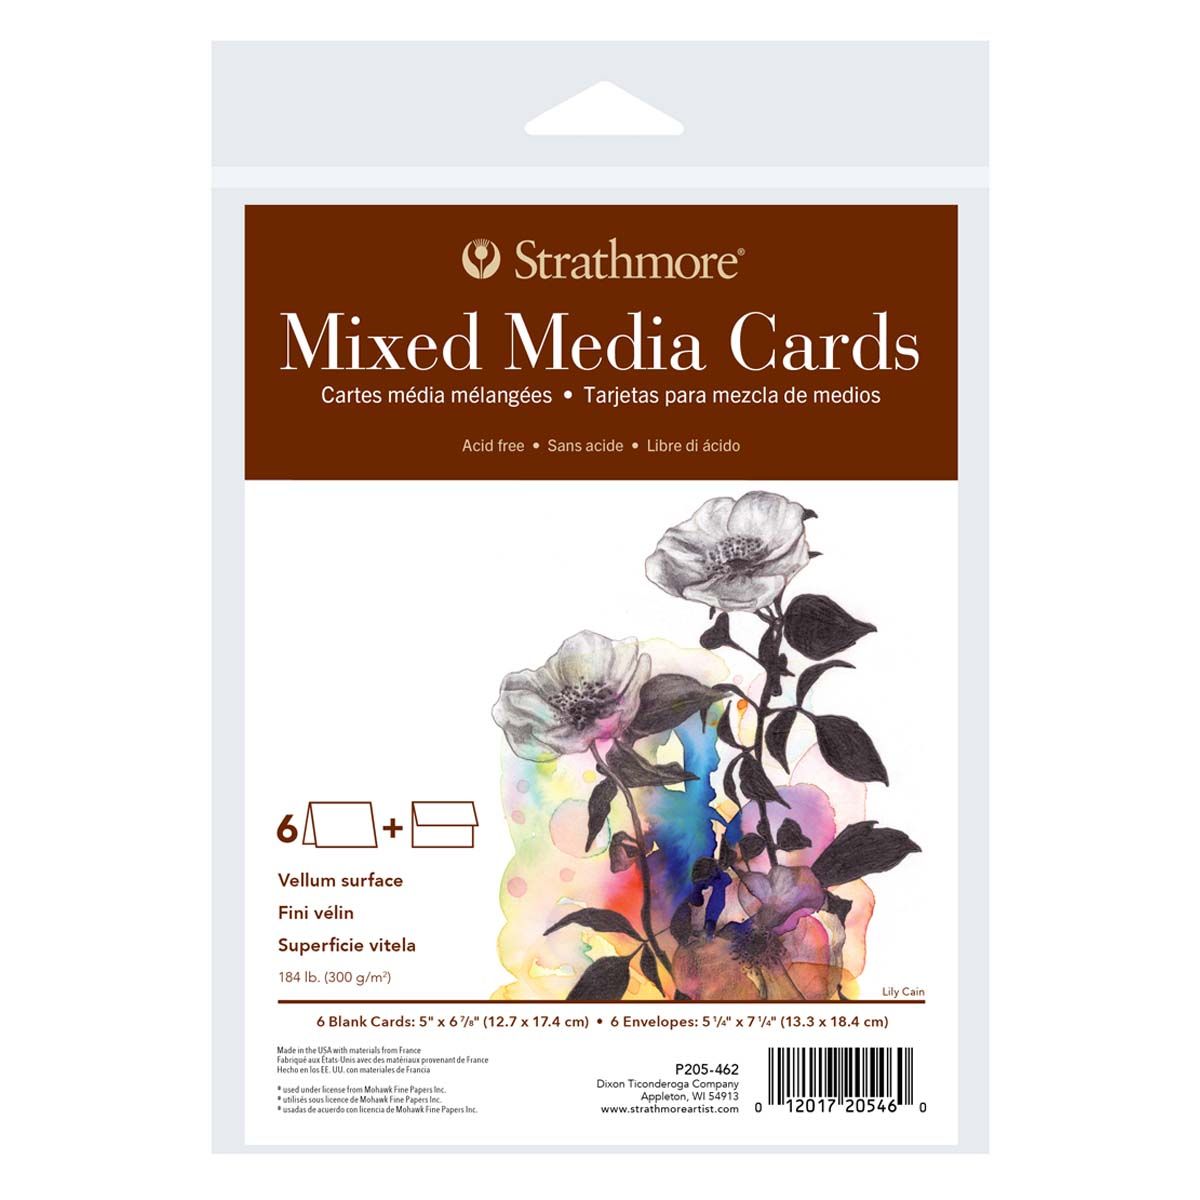  Strathmore Watercolor Cards, 5x6.875 inches, 50 Pack